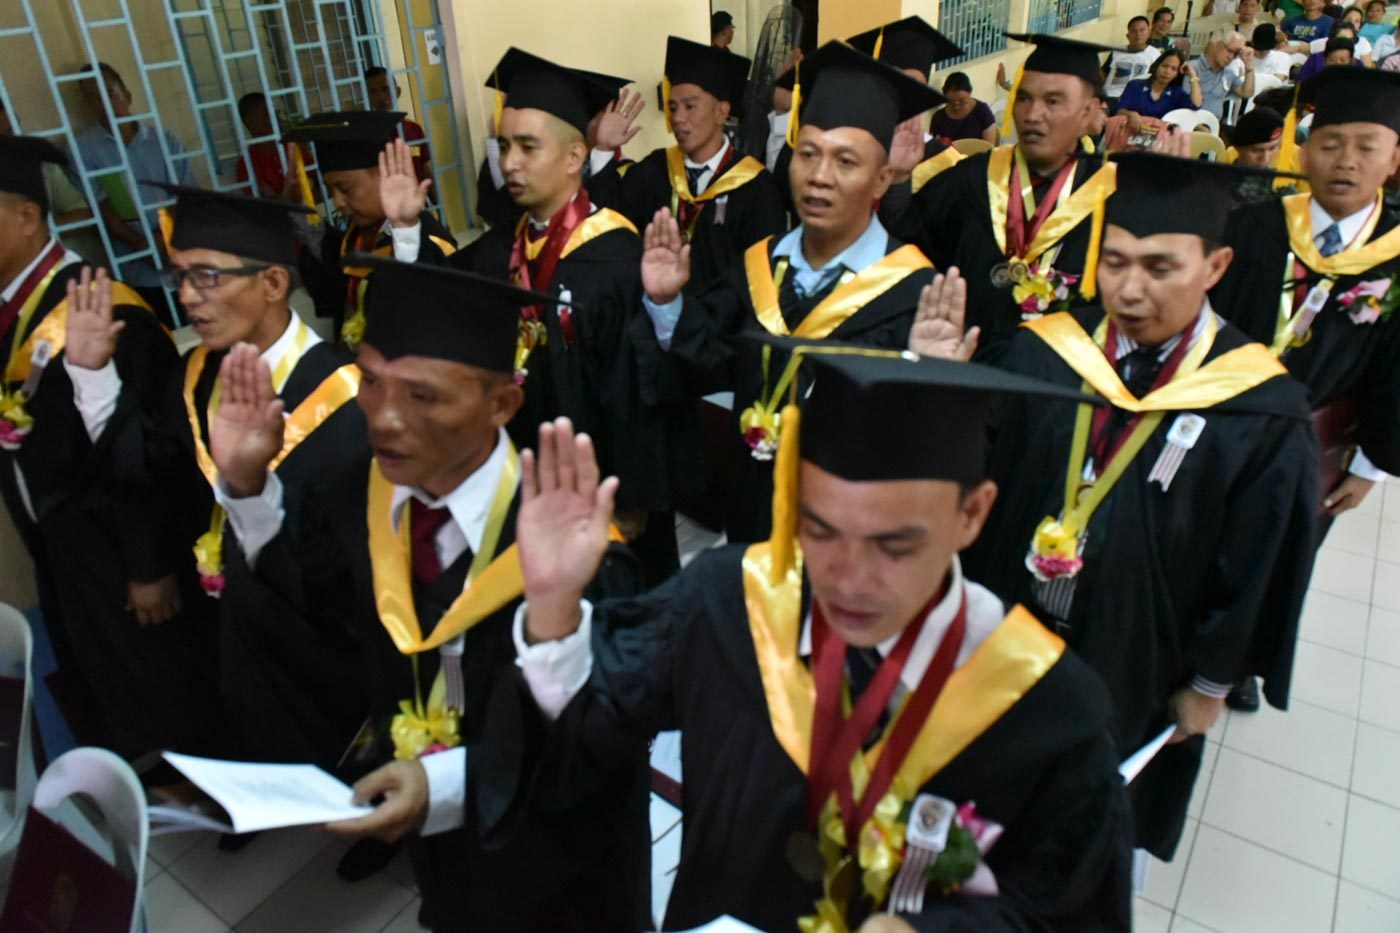 New hope for 34 student-inmates who graduate inside Bilibid